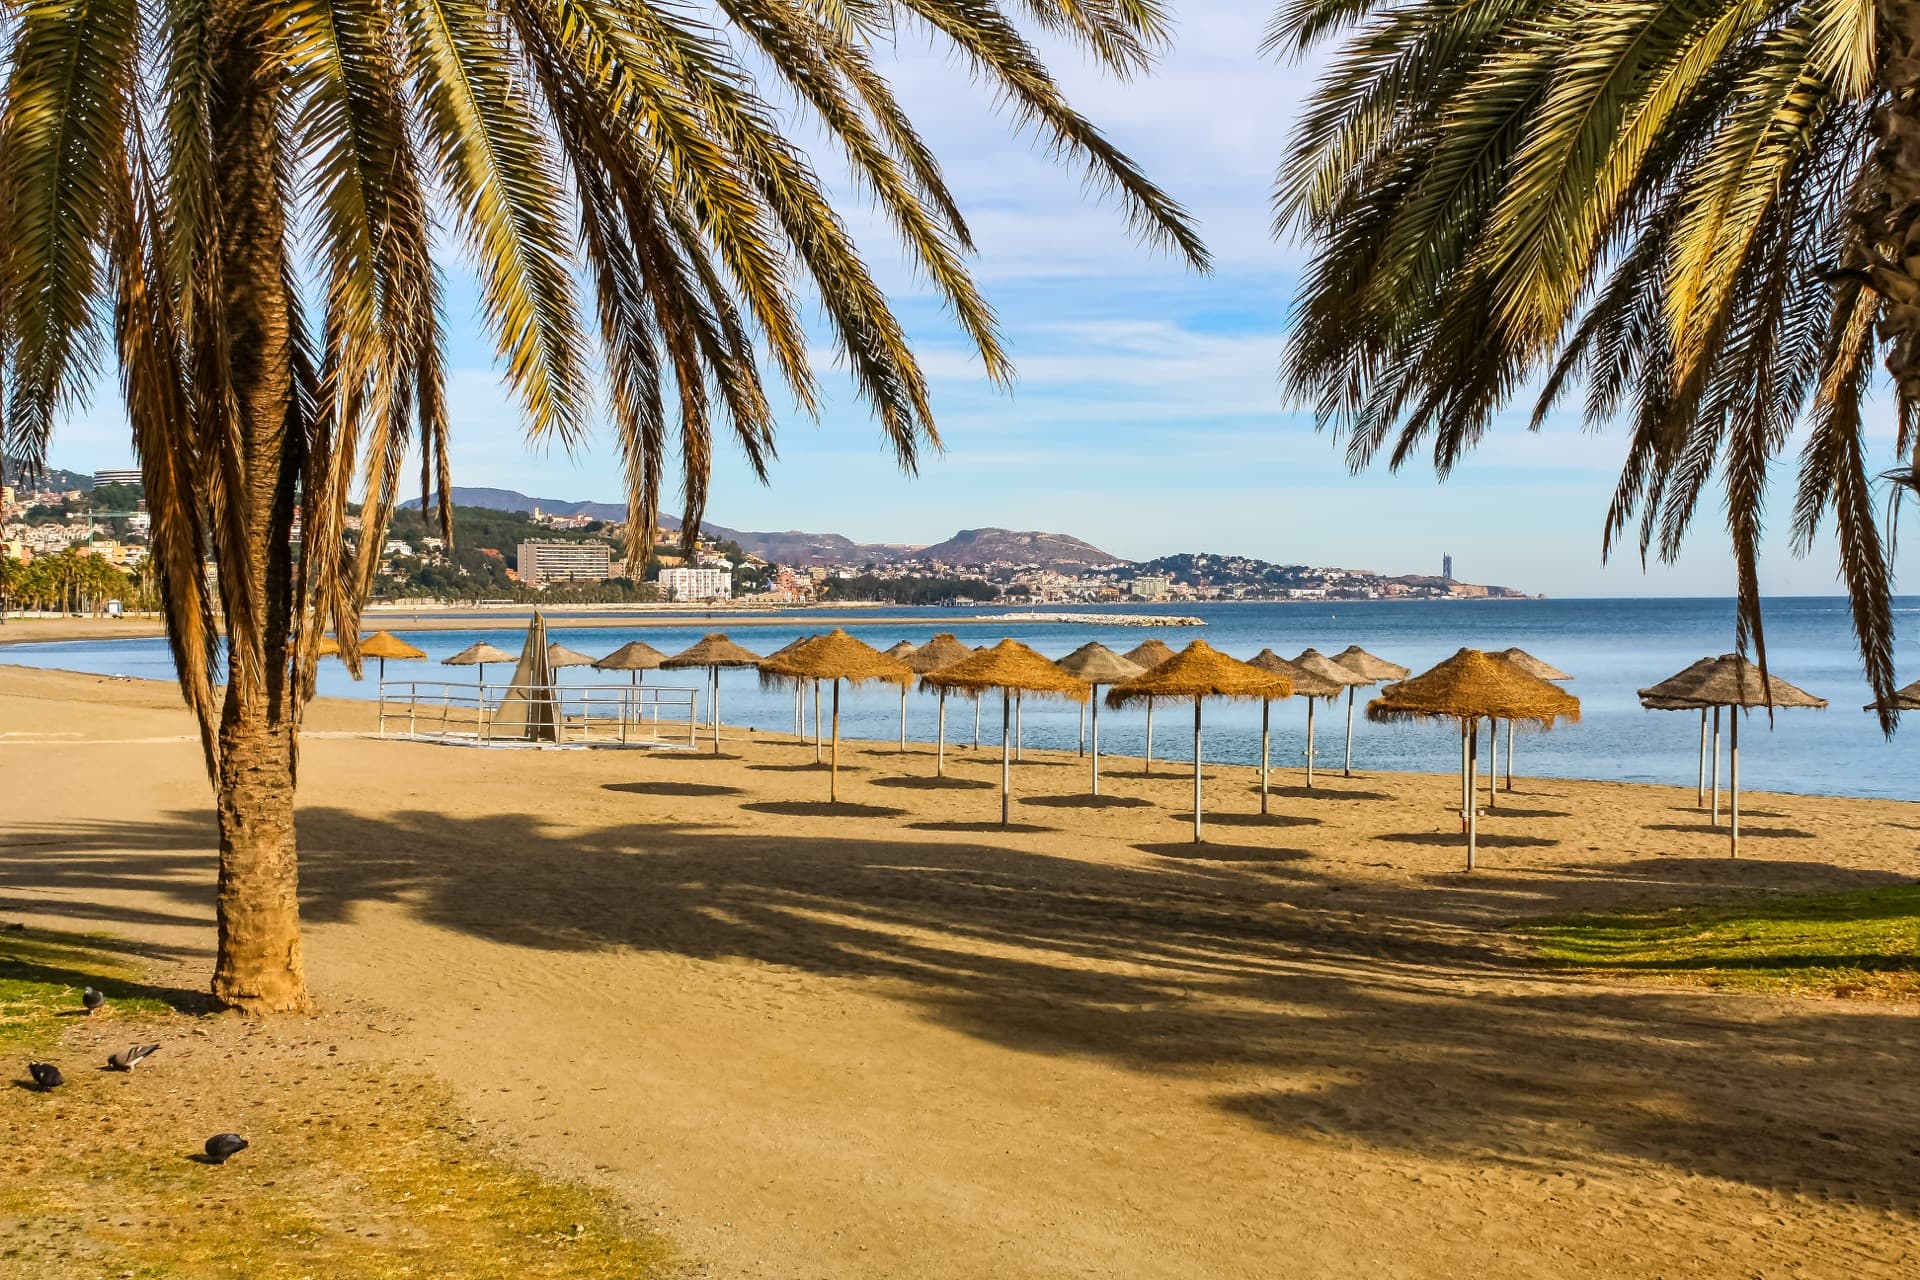 beach-with-palm-trees-umbrellas-sand-summer-day-without-people-malaga-web